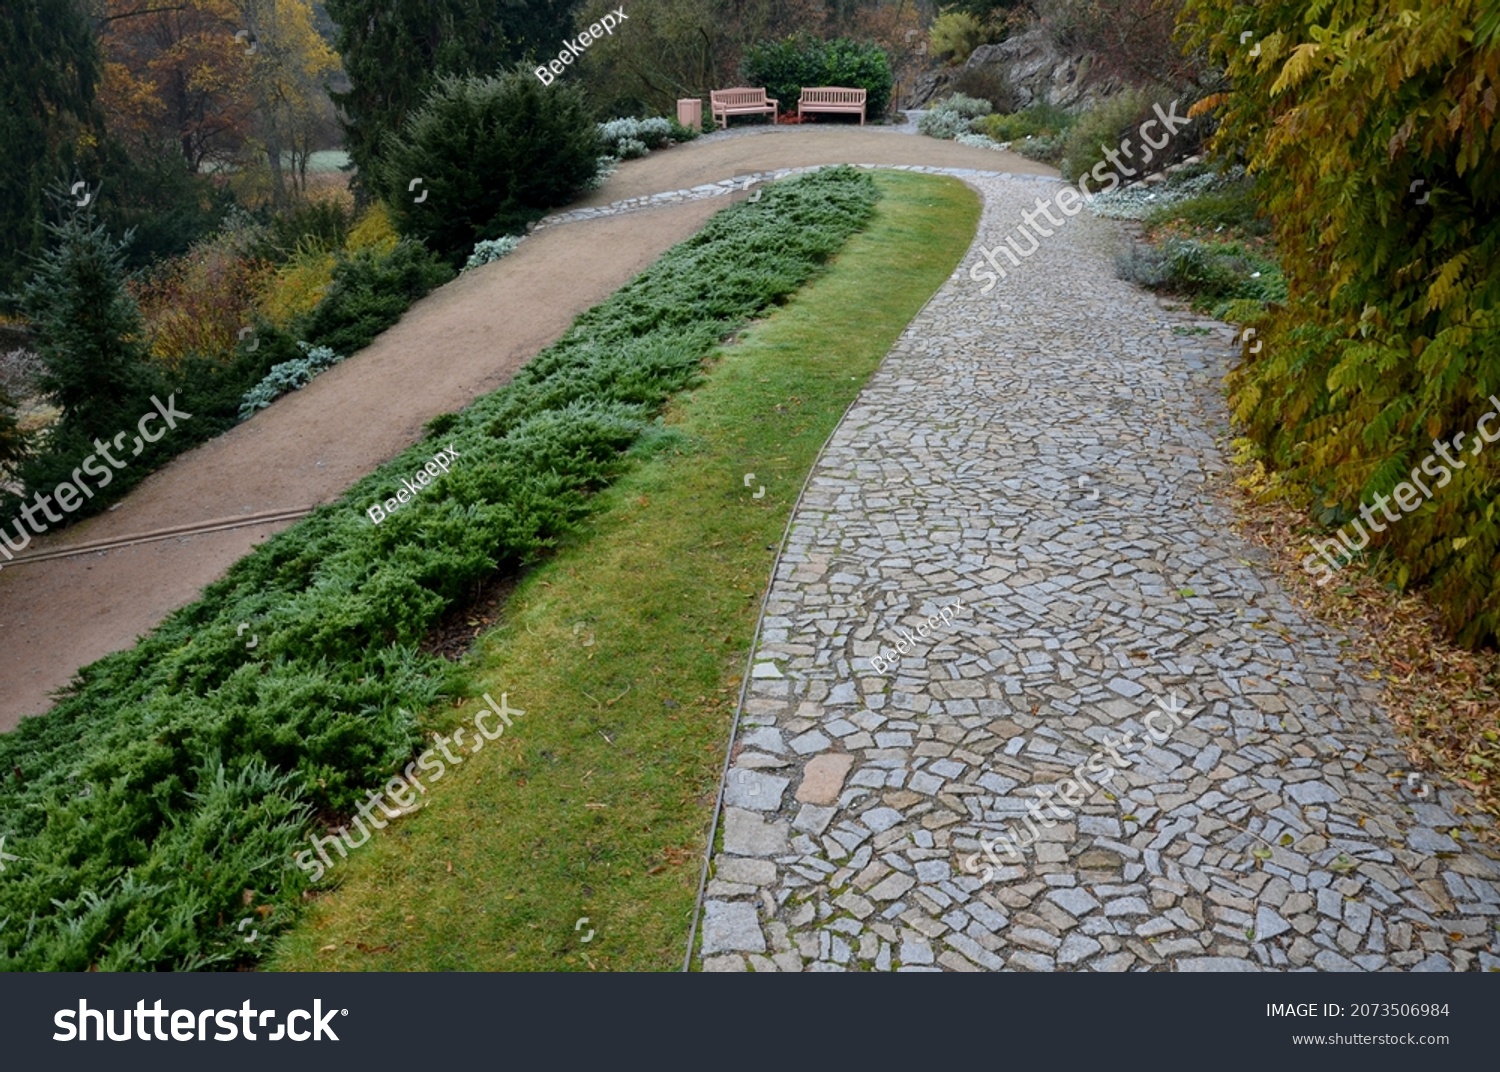 stabilization of the slope with the help of wooden slats, which with the help of wires hold soil on the slope. granite park paths and perennial flower beds with benches. historic garden above lake  #2073506984